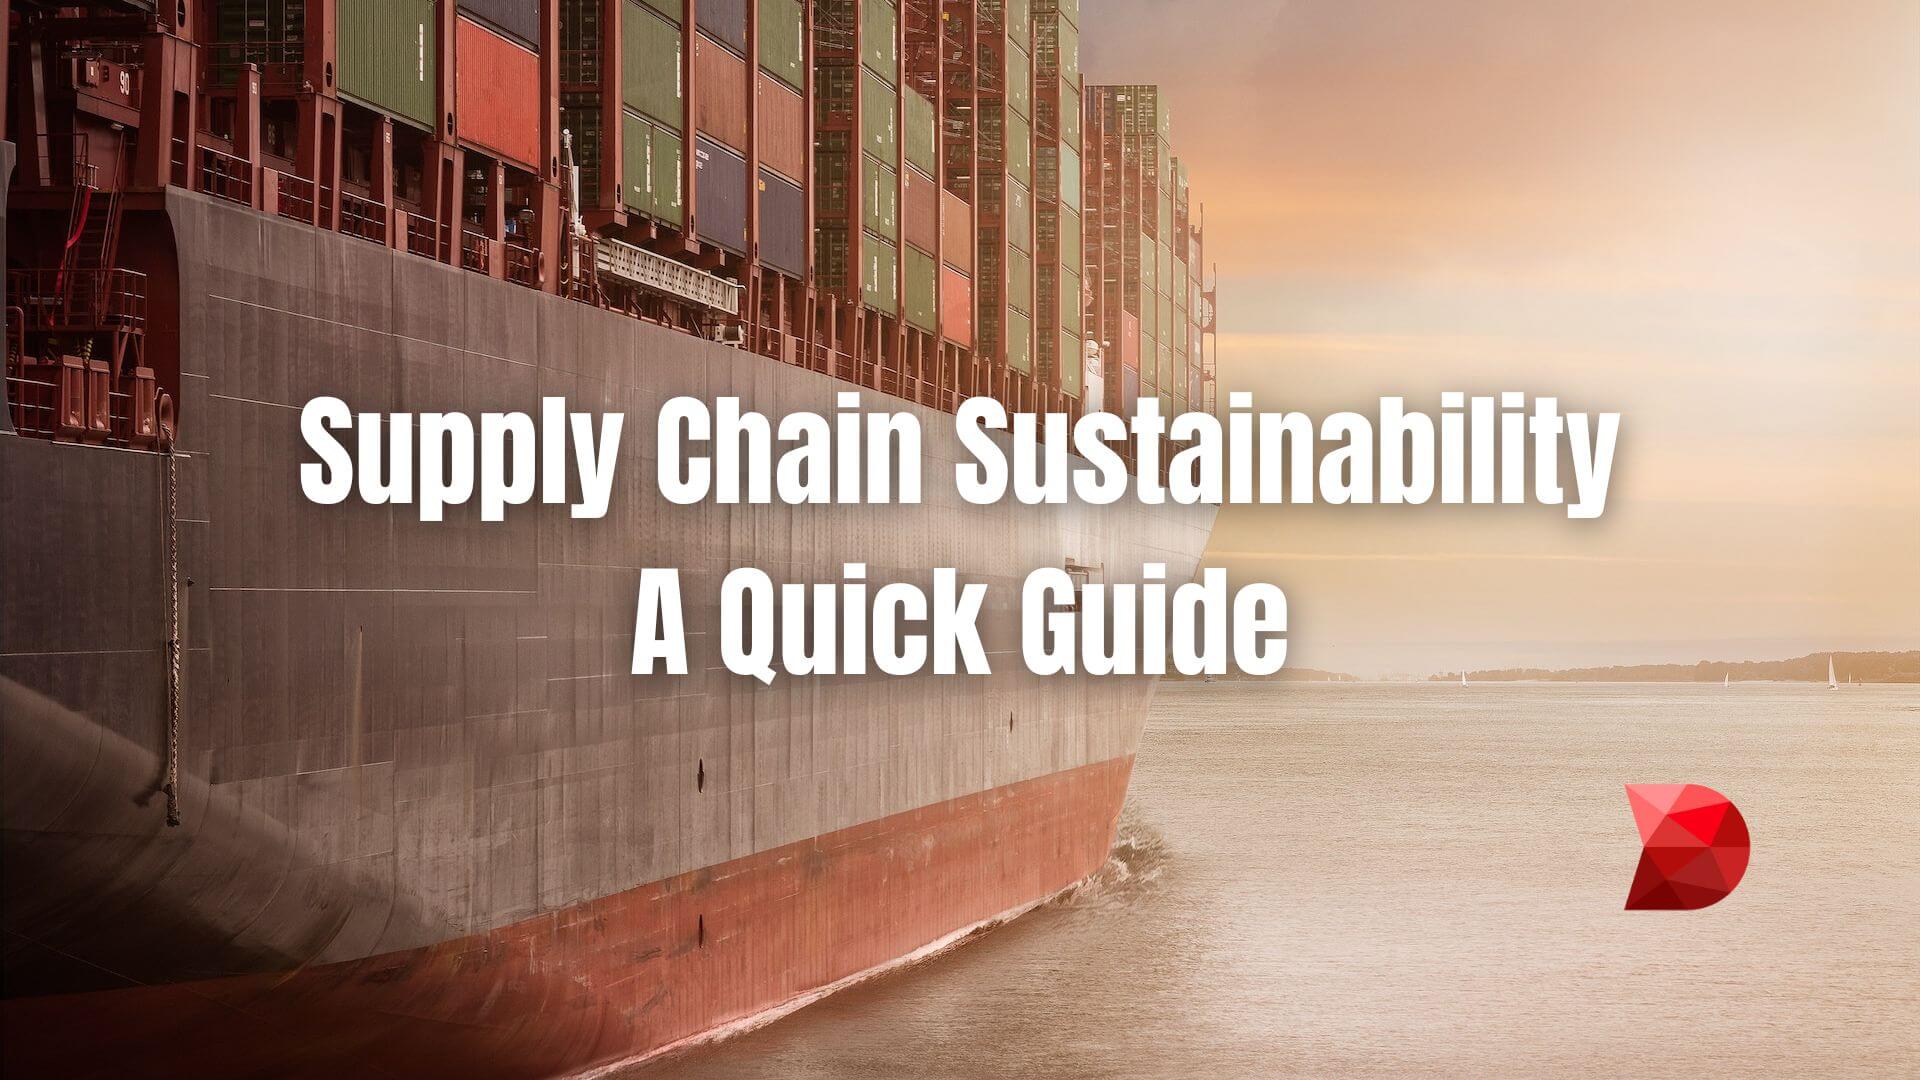 Supply chain sustainability in business operations has become a challenging issue for corporations to address. Here's how it works.